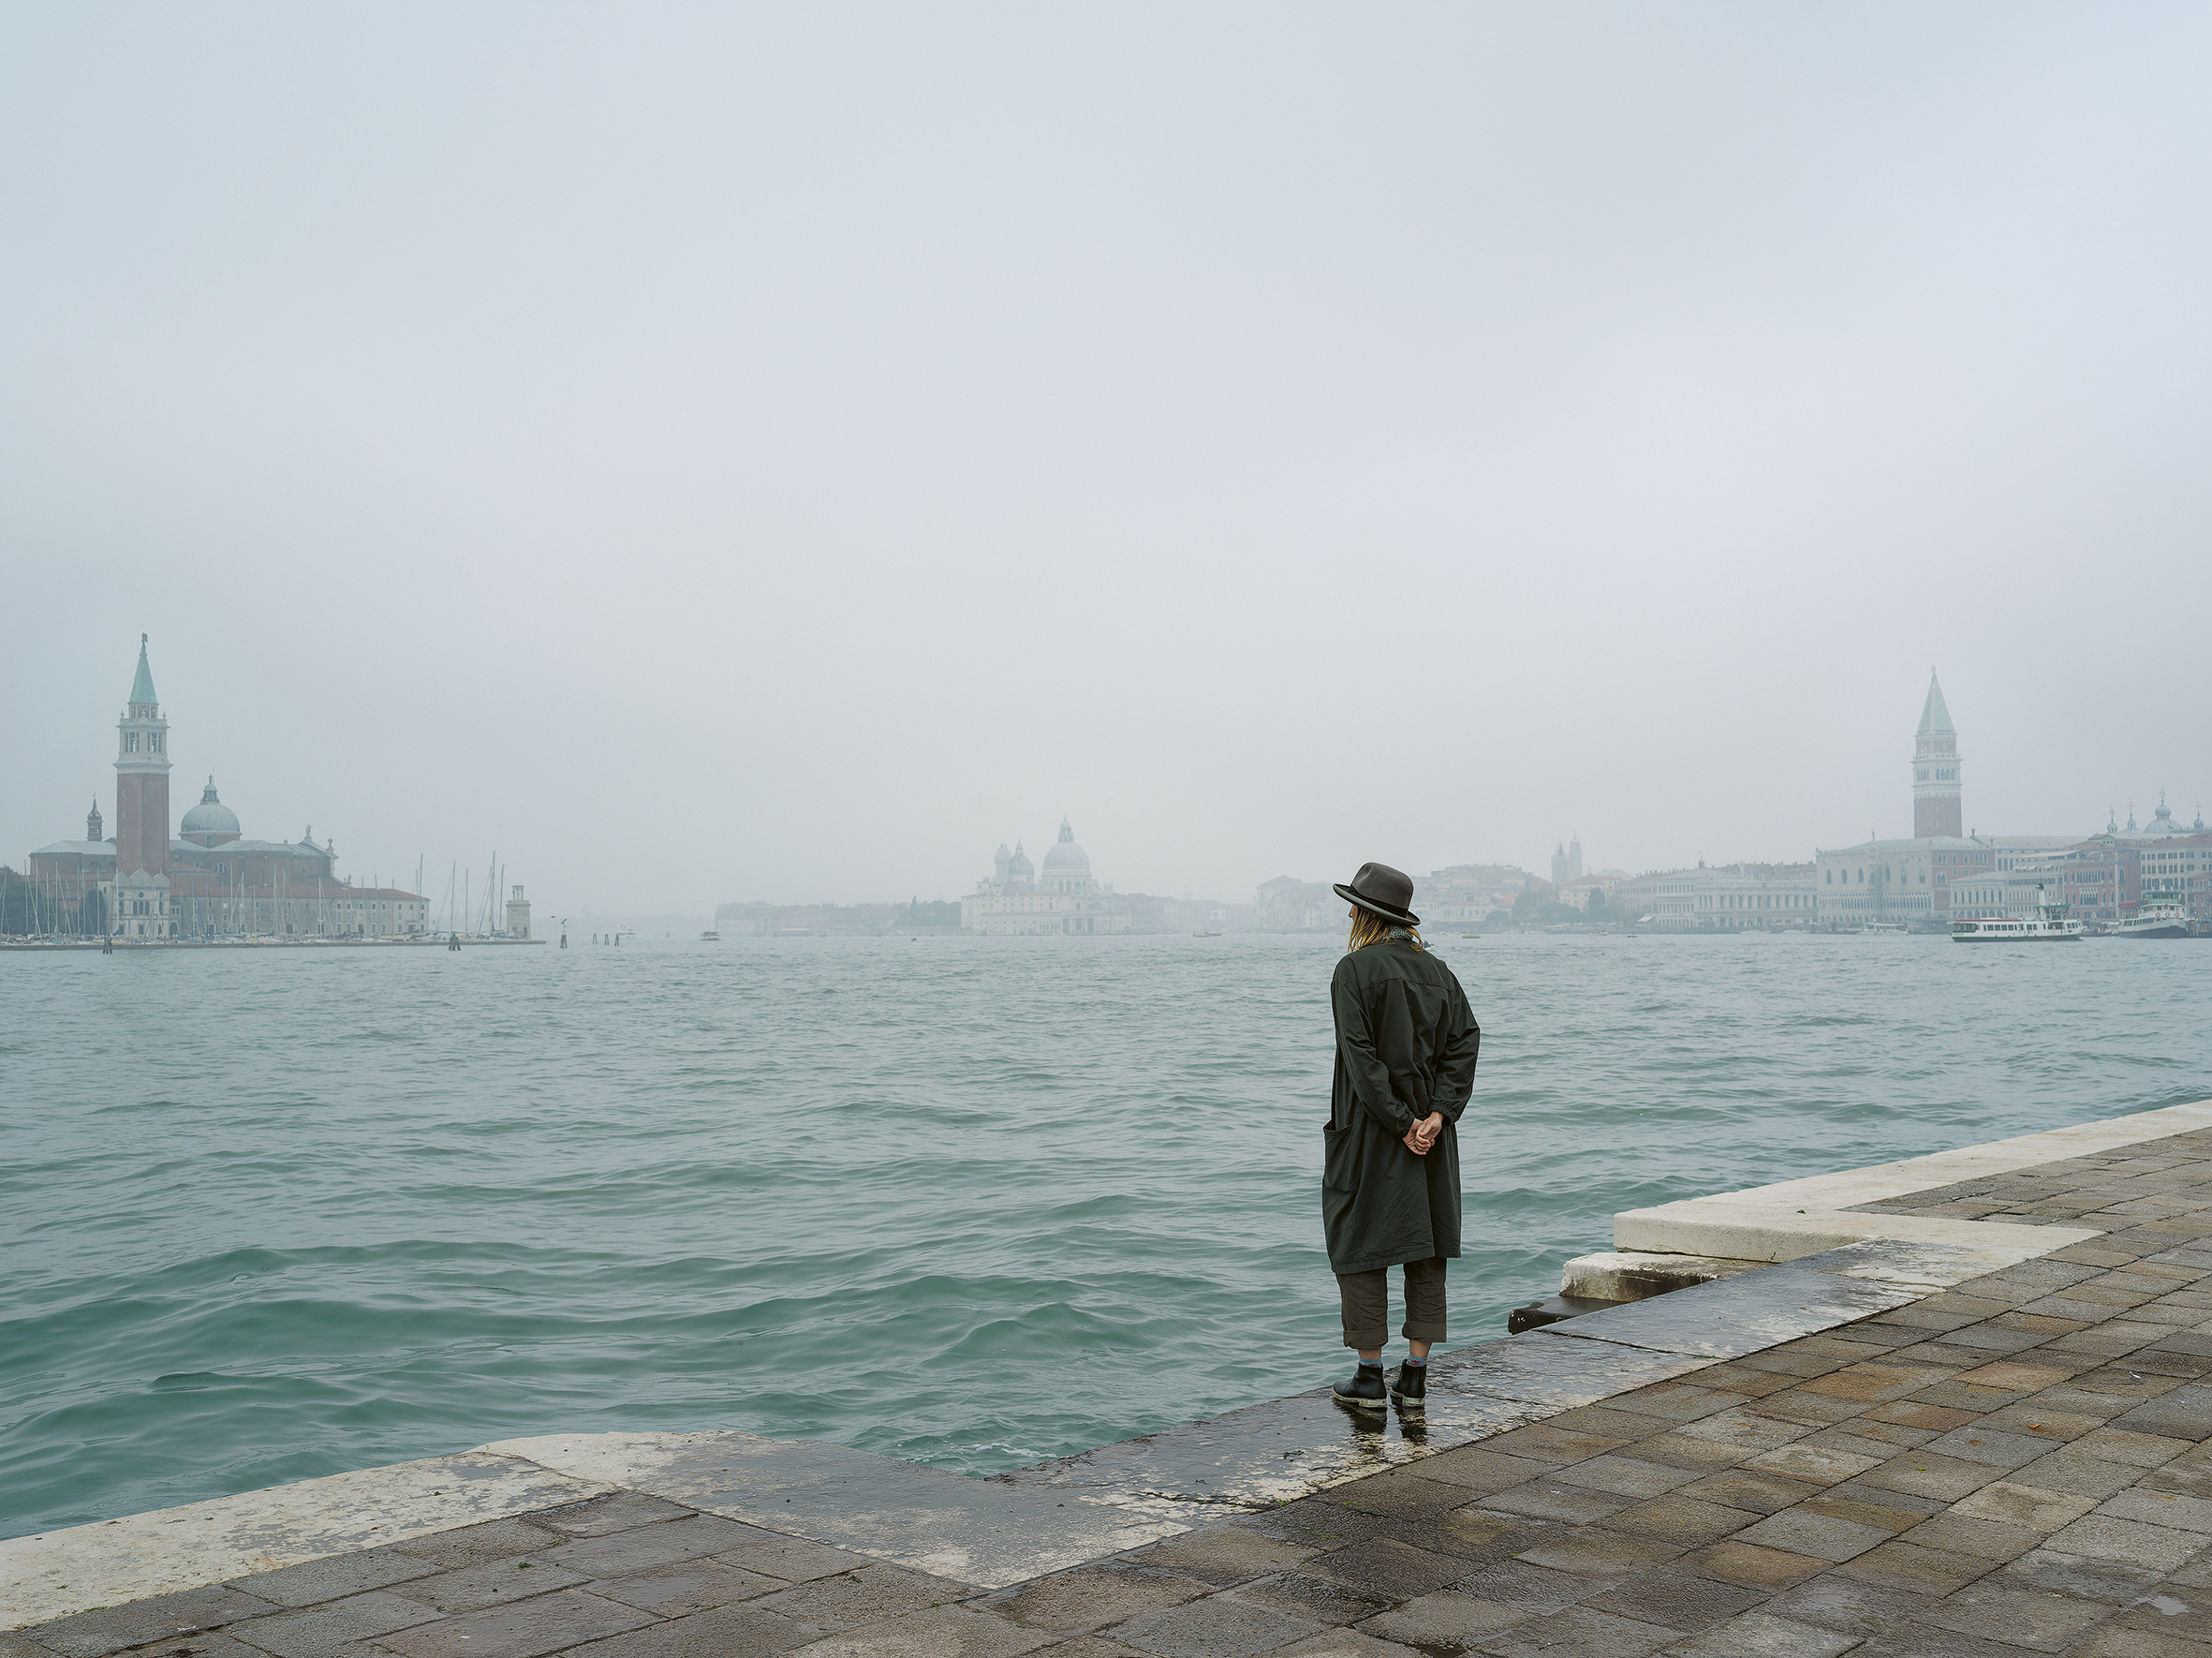 photograph by the artist Elina Brotherus, dressed as the artist Joseph Beuys, looking out on the water in Venice